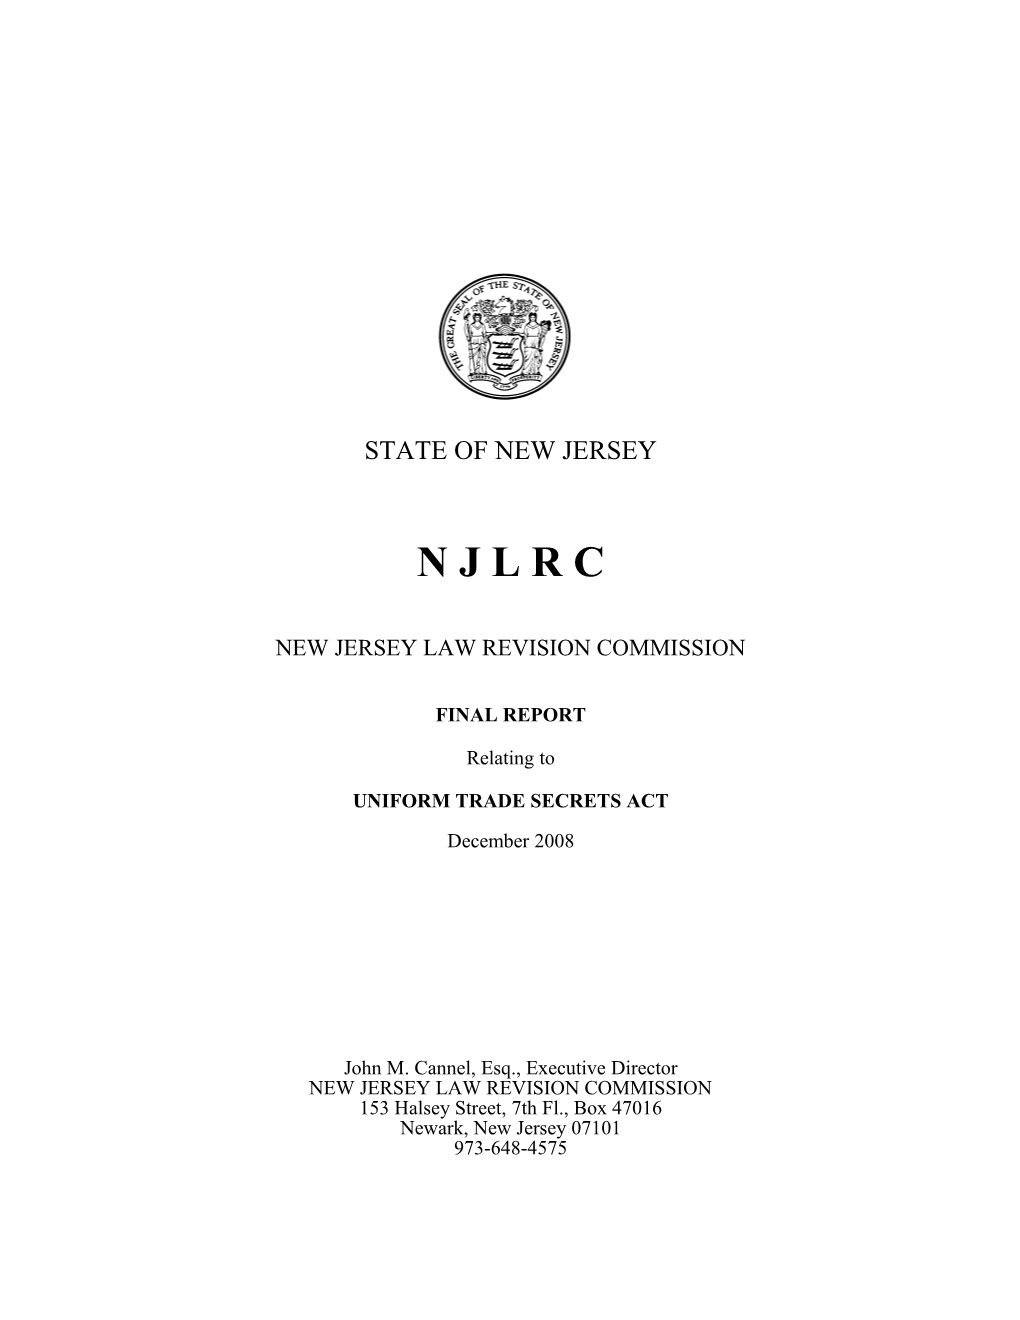 To: New Jersey Law Revision Commission s14